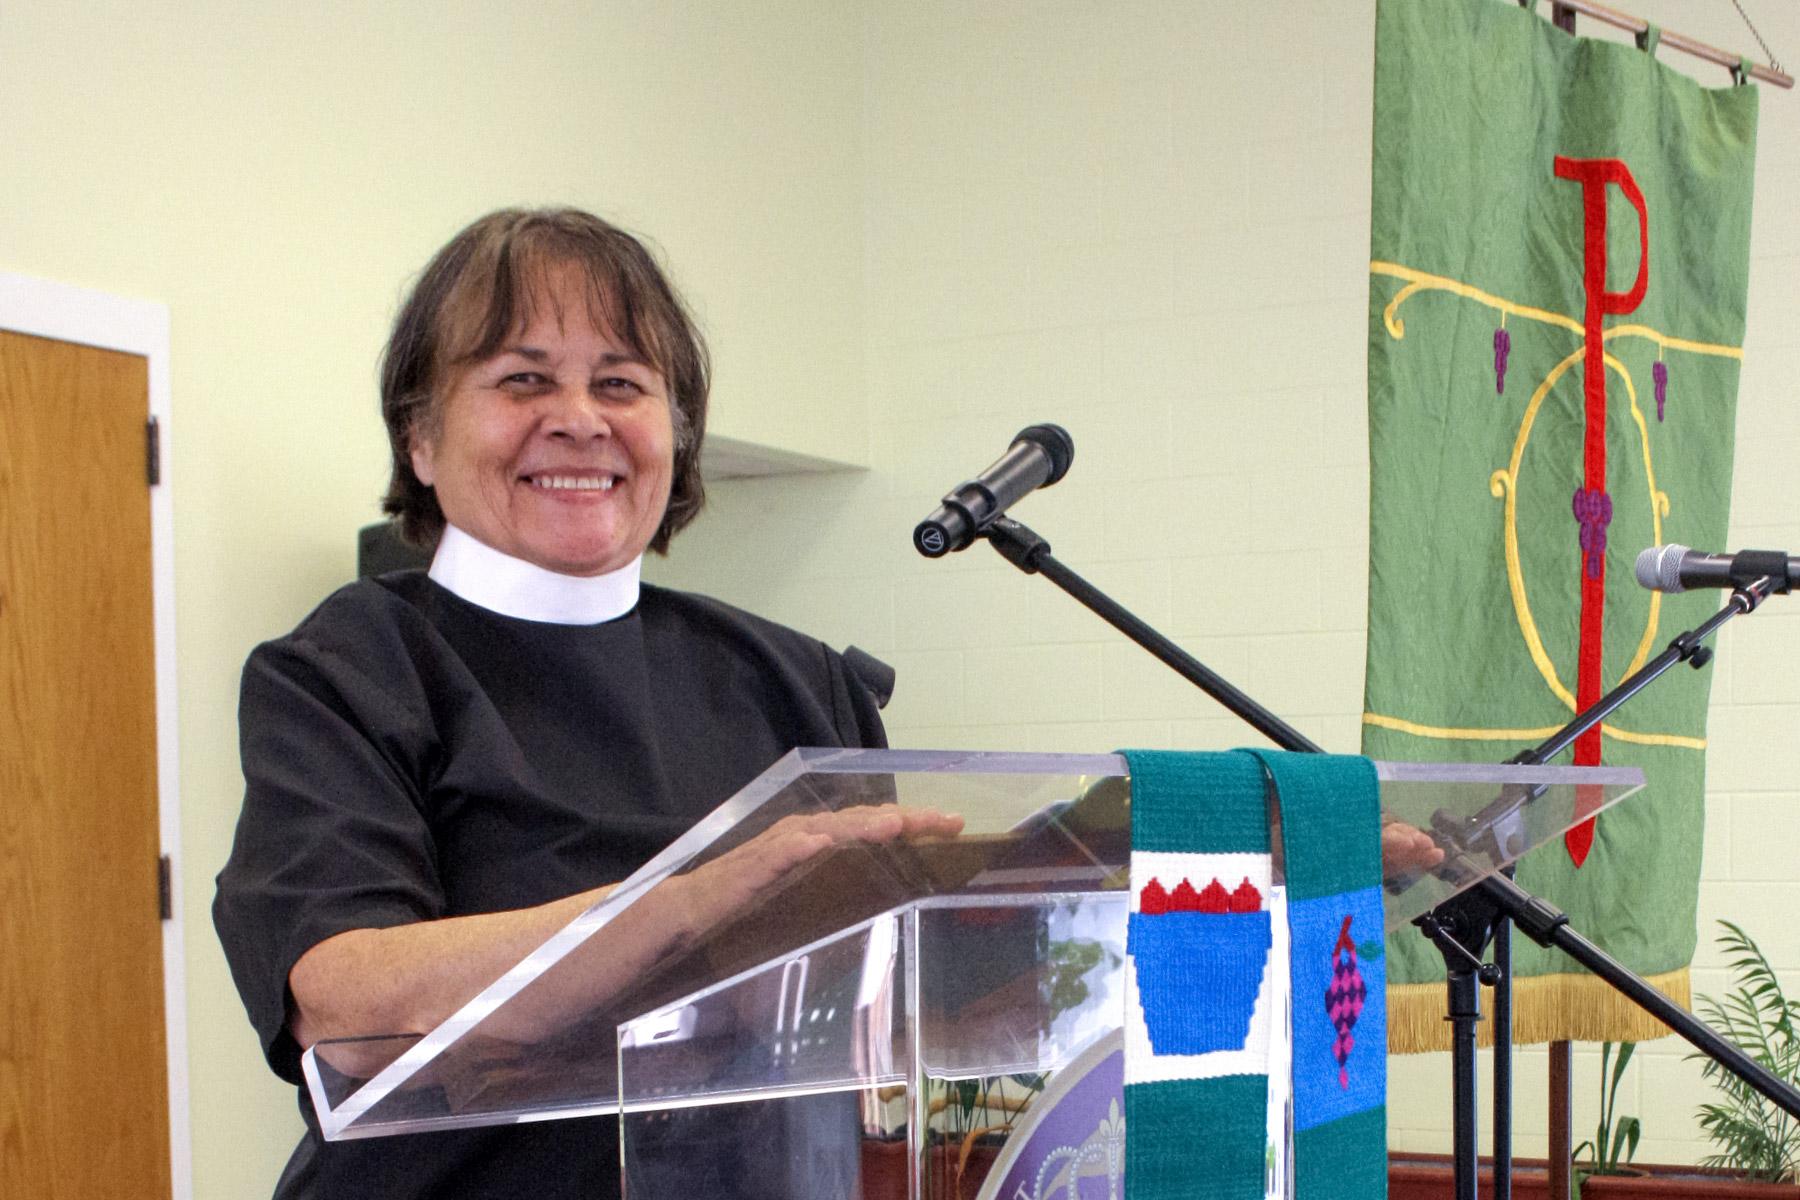 Rev. Joann Conroy, an Oglala Sioux woman, explains how the church might learn to care for creation from Indigenous people around the world. Photo: ELCA